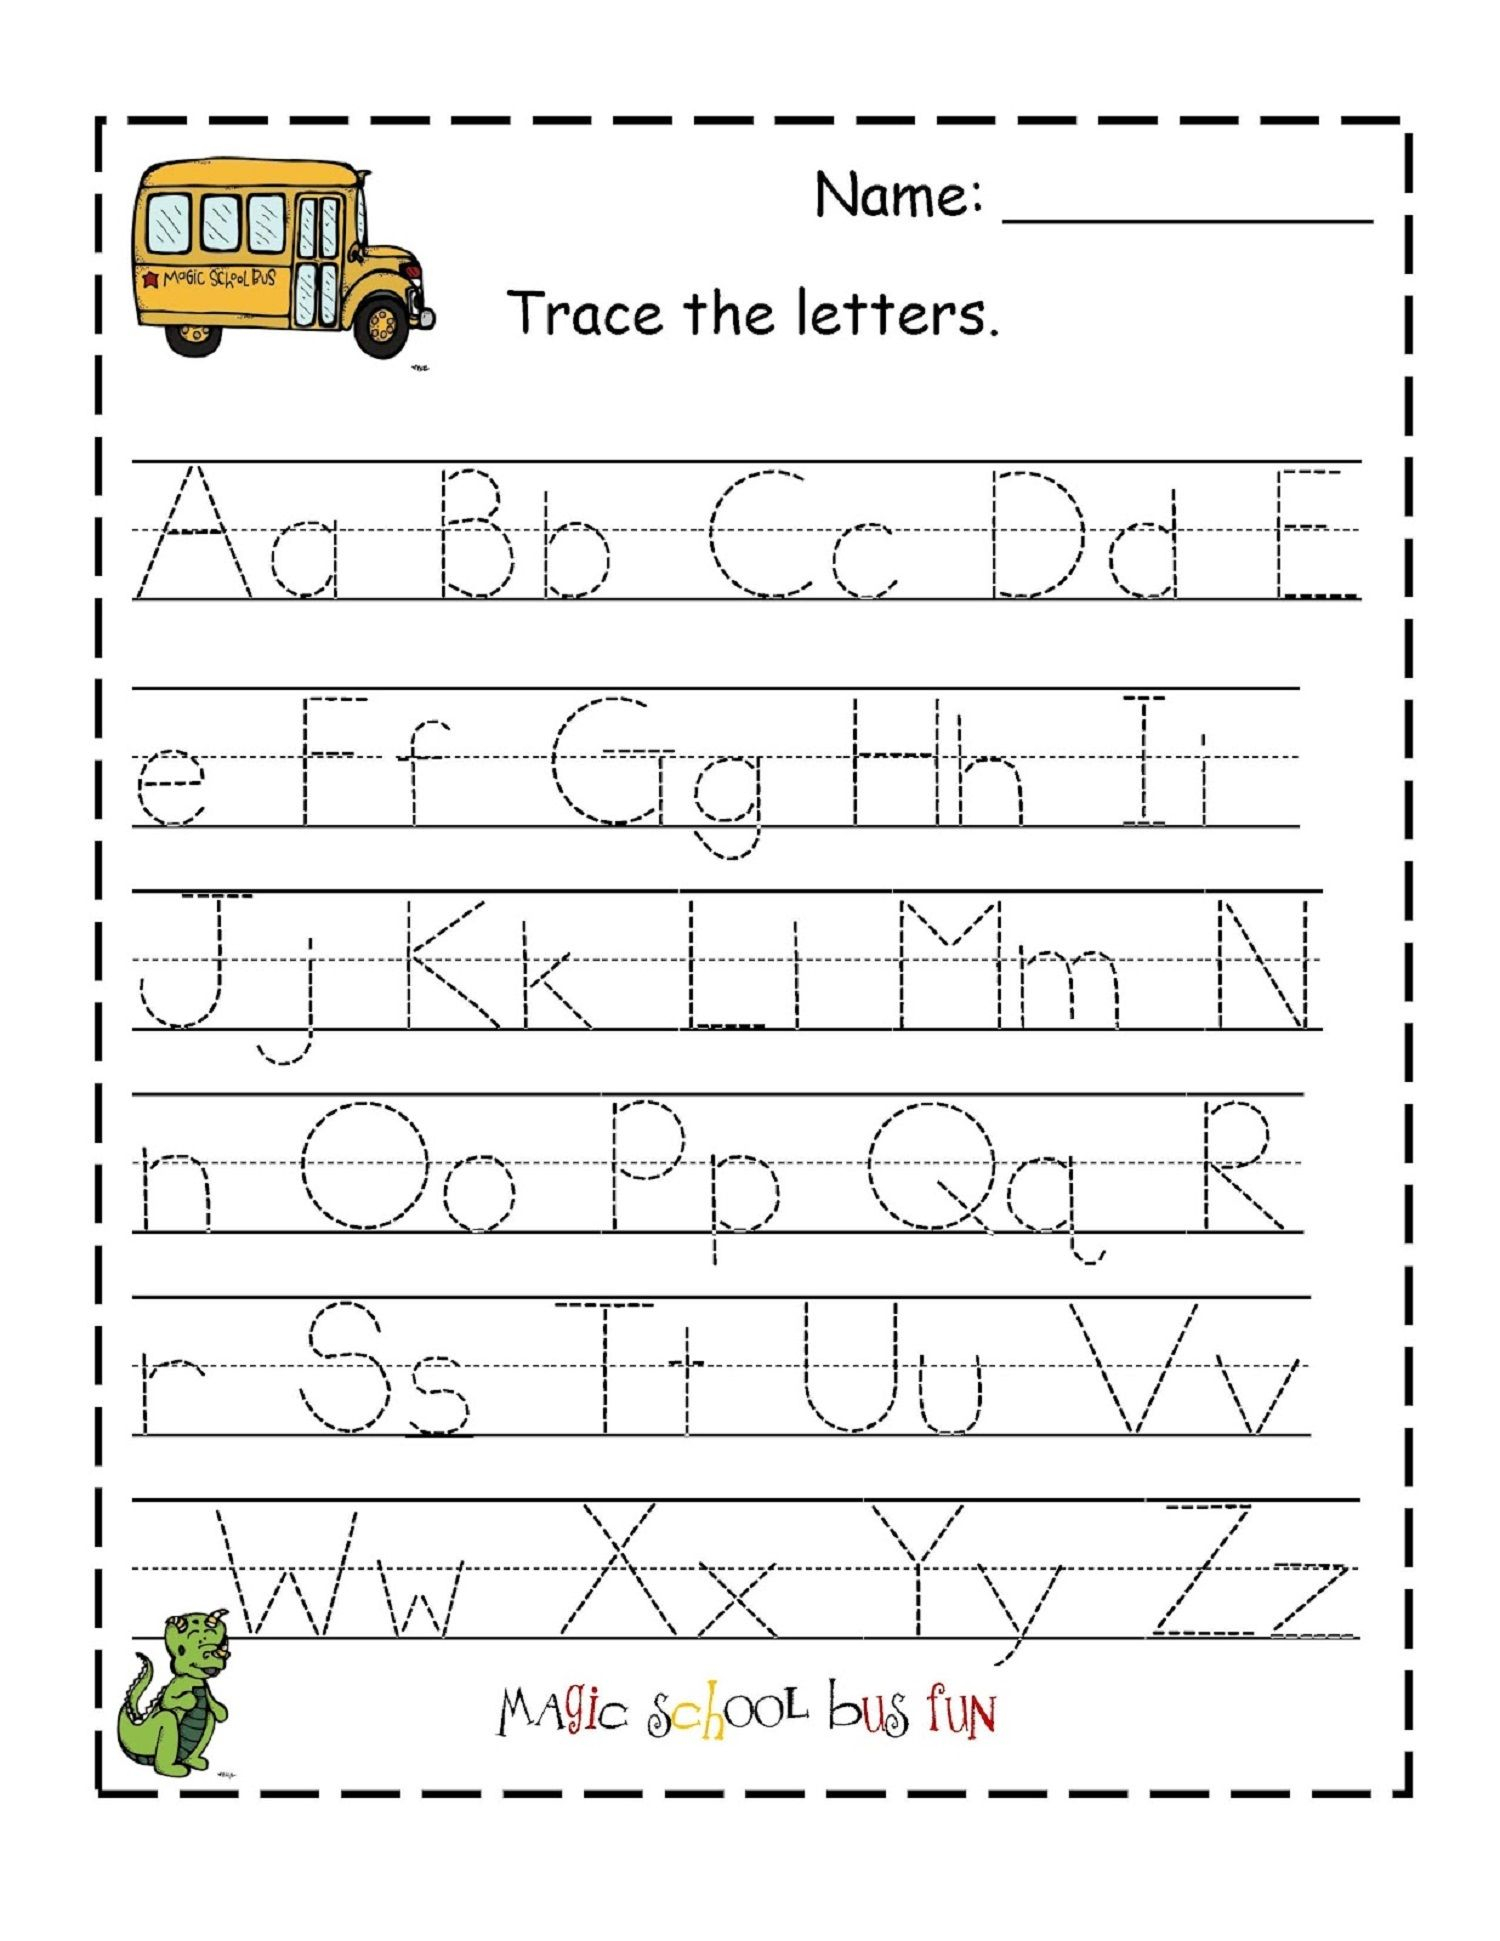 Traceable Alphabet For Learning Exercise | Letter Tracing regarding Letter Tracing Worksheets Editable